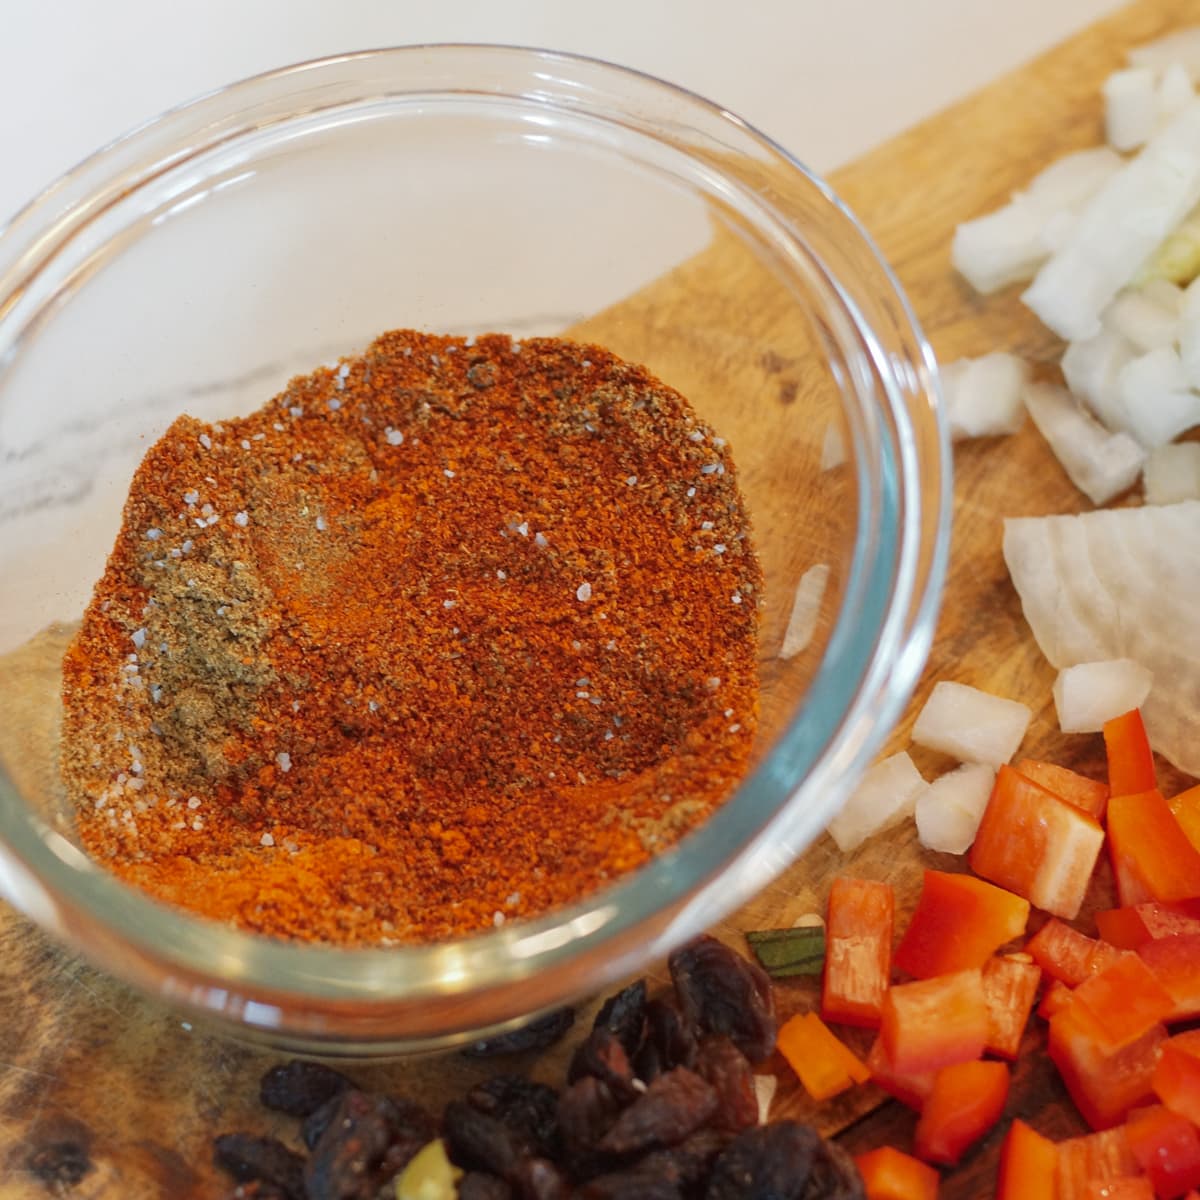 Spice mix in a bowl.